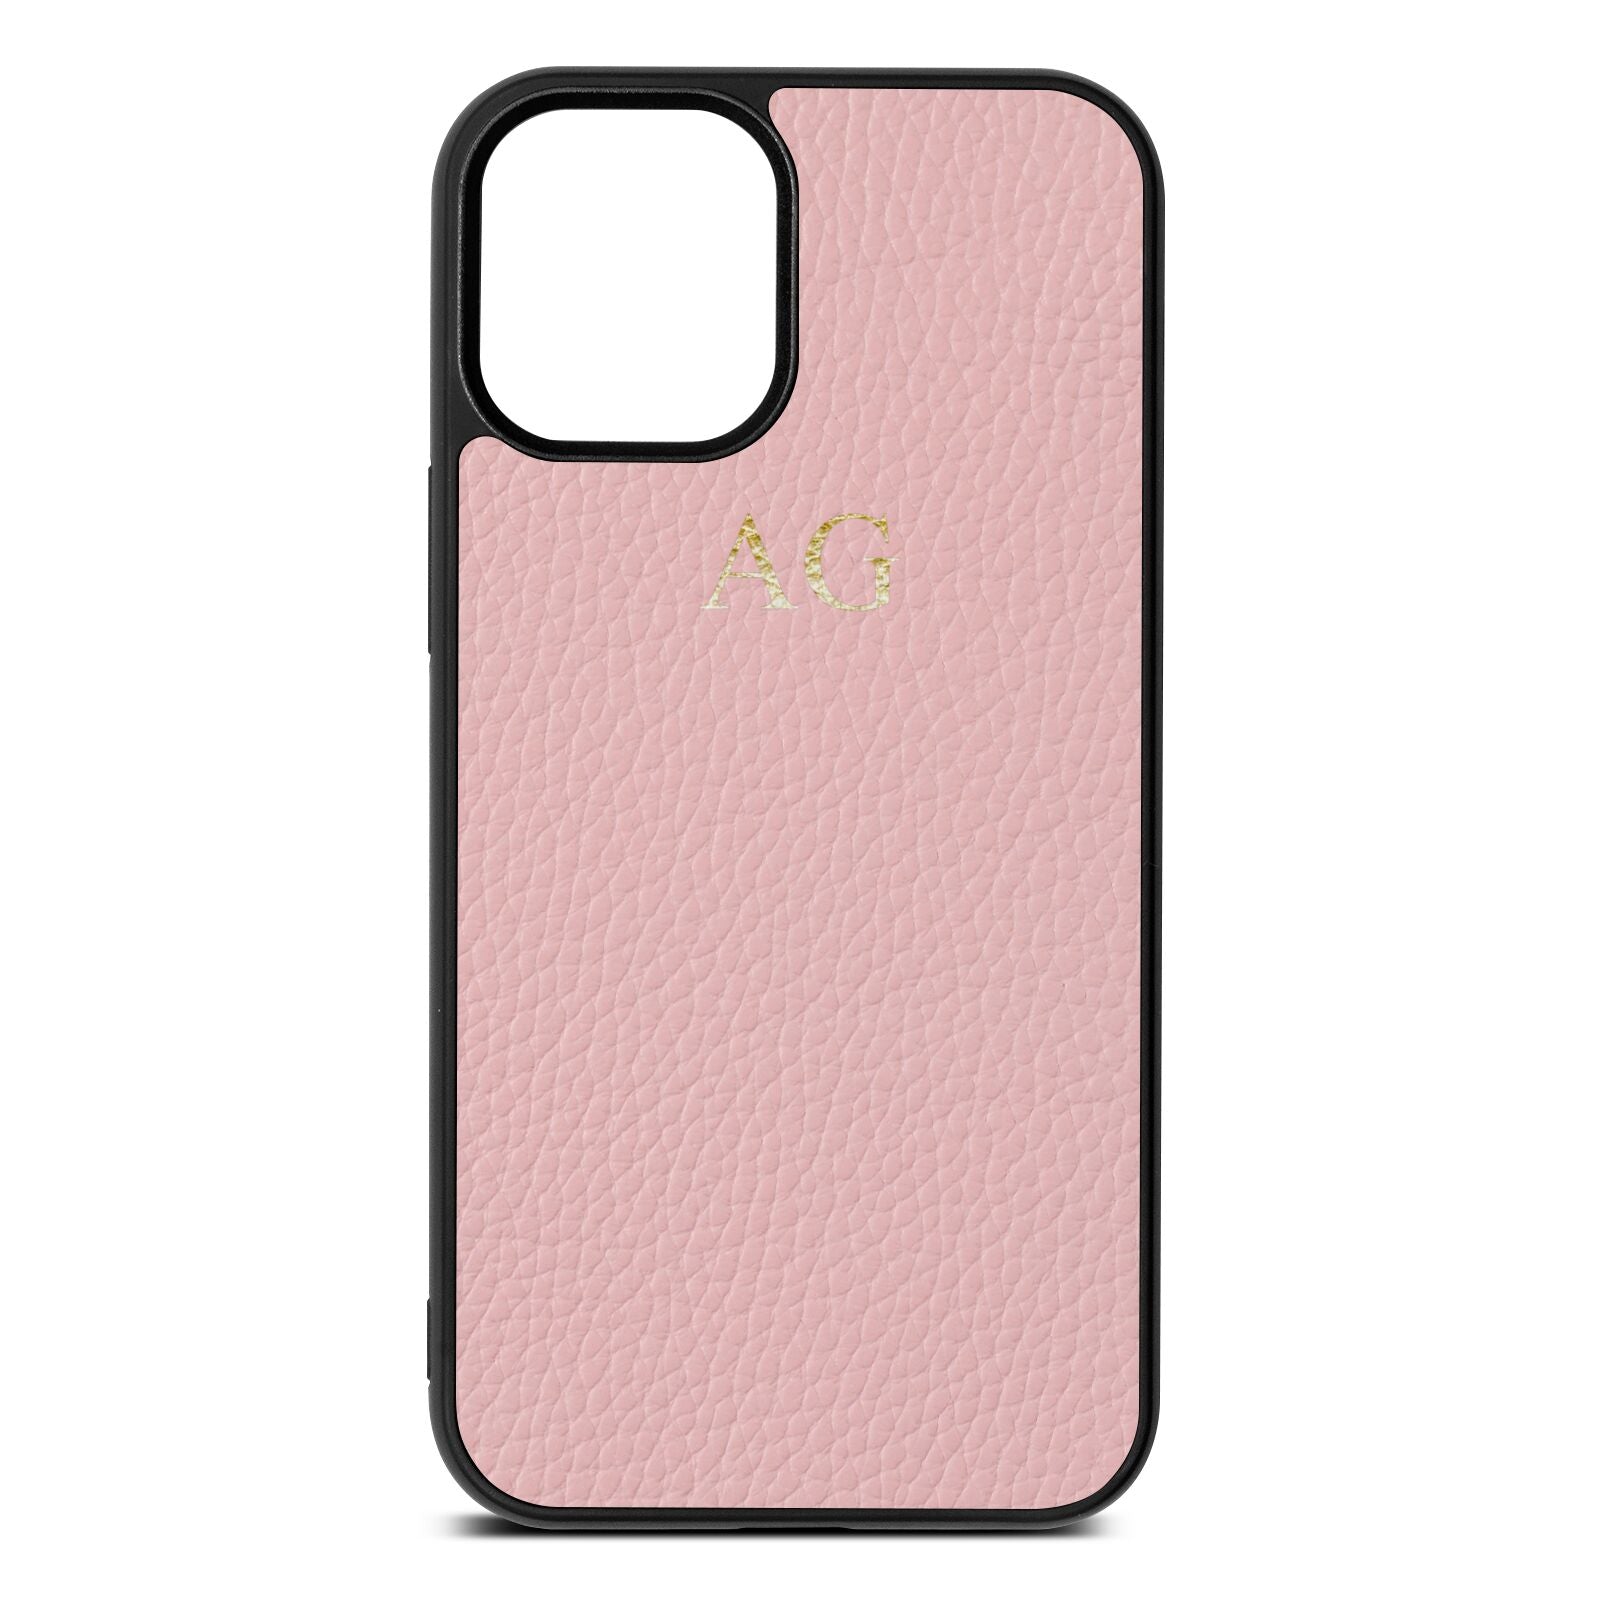 Personalised Pink Pebble Leather iPhone 12 Mini Case